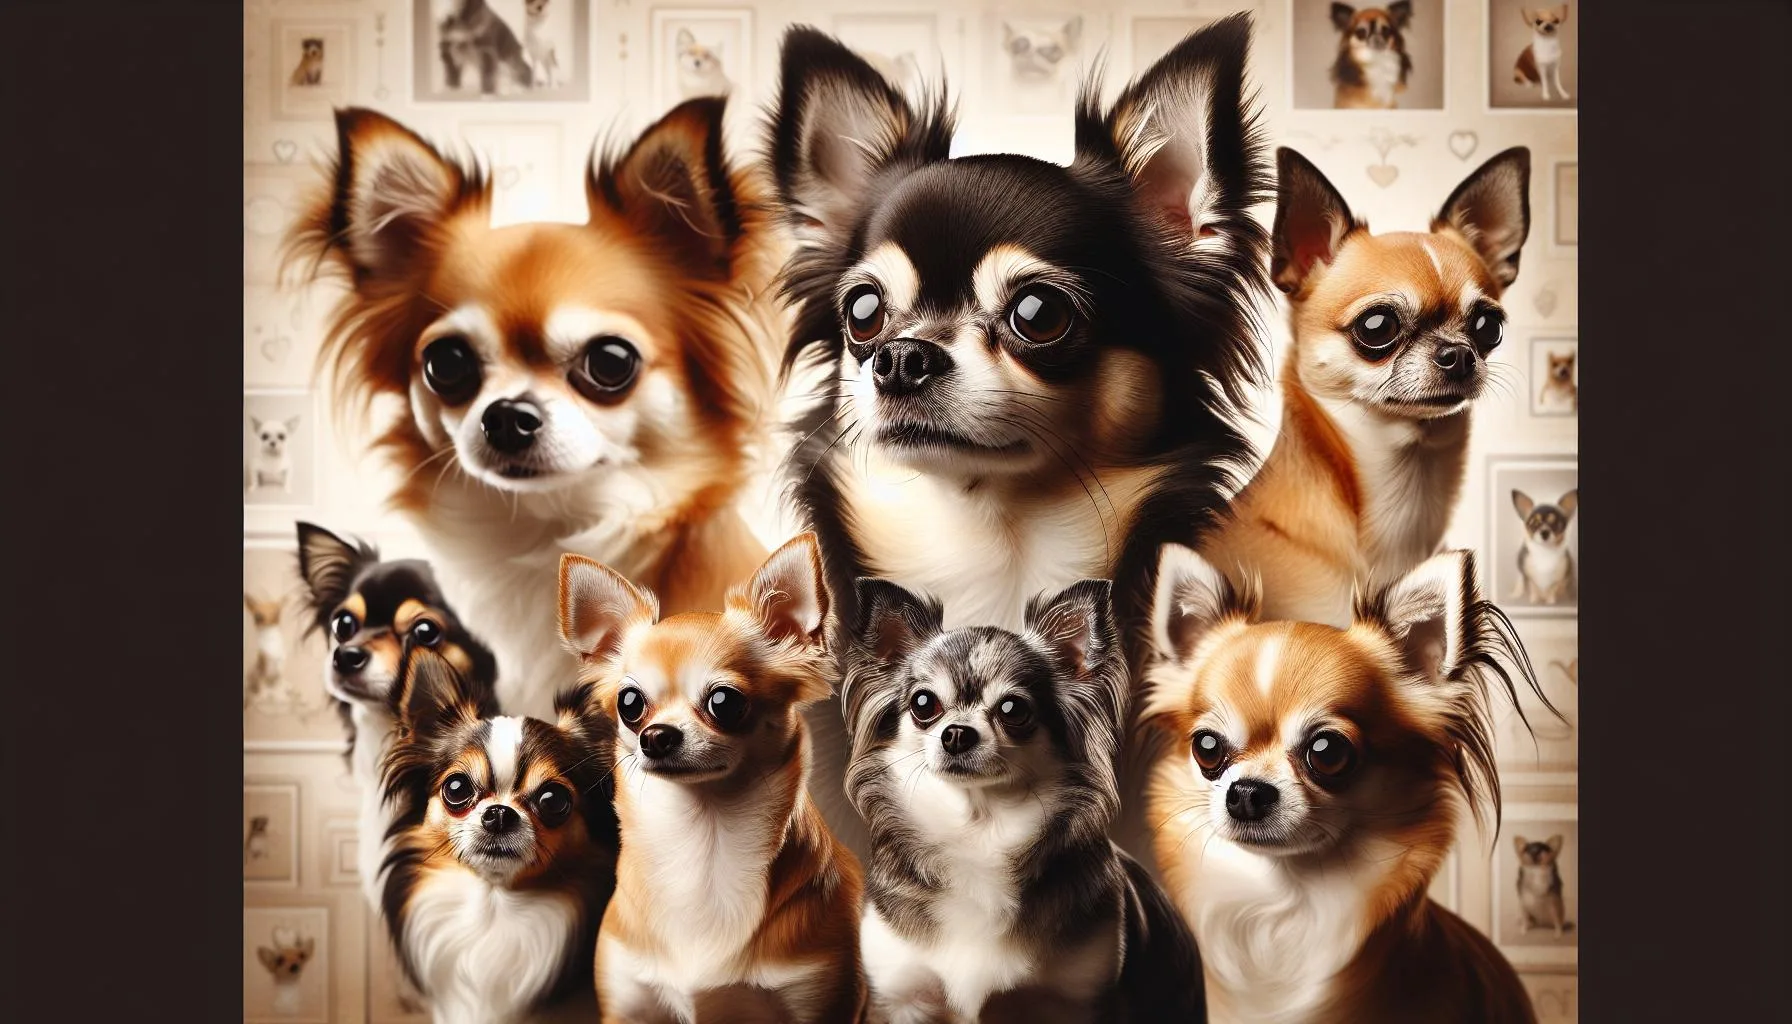  chihuahua breeds mix Reasons for the Popularity of Chihuahua Mixes